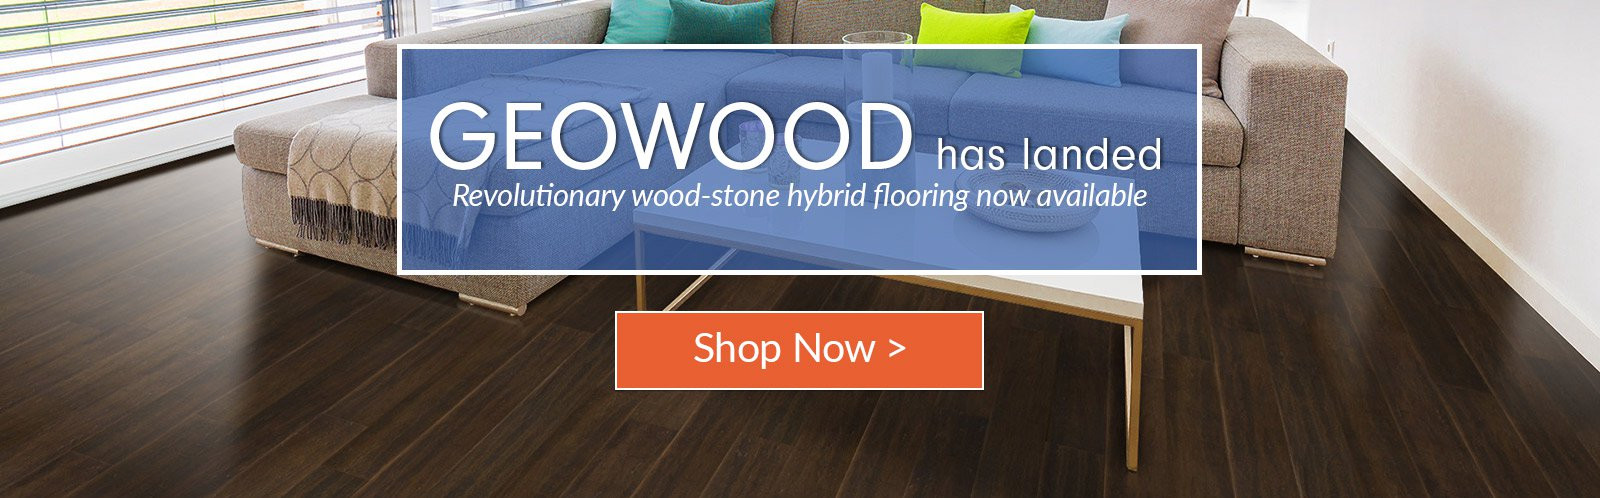 22 Perfect Hardwood Floor Repair Denver Co 2024 free download hardwood floor repair denver co of green building construction materials and home decor cali bamboo pertaining to geowood launch homepage slider